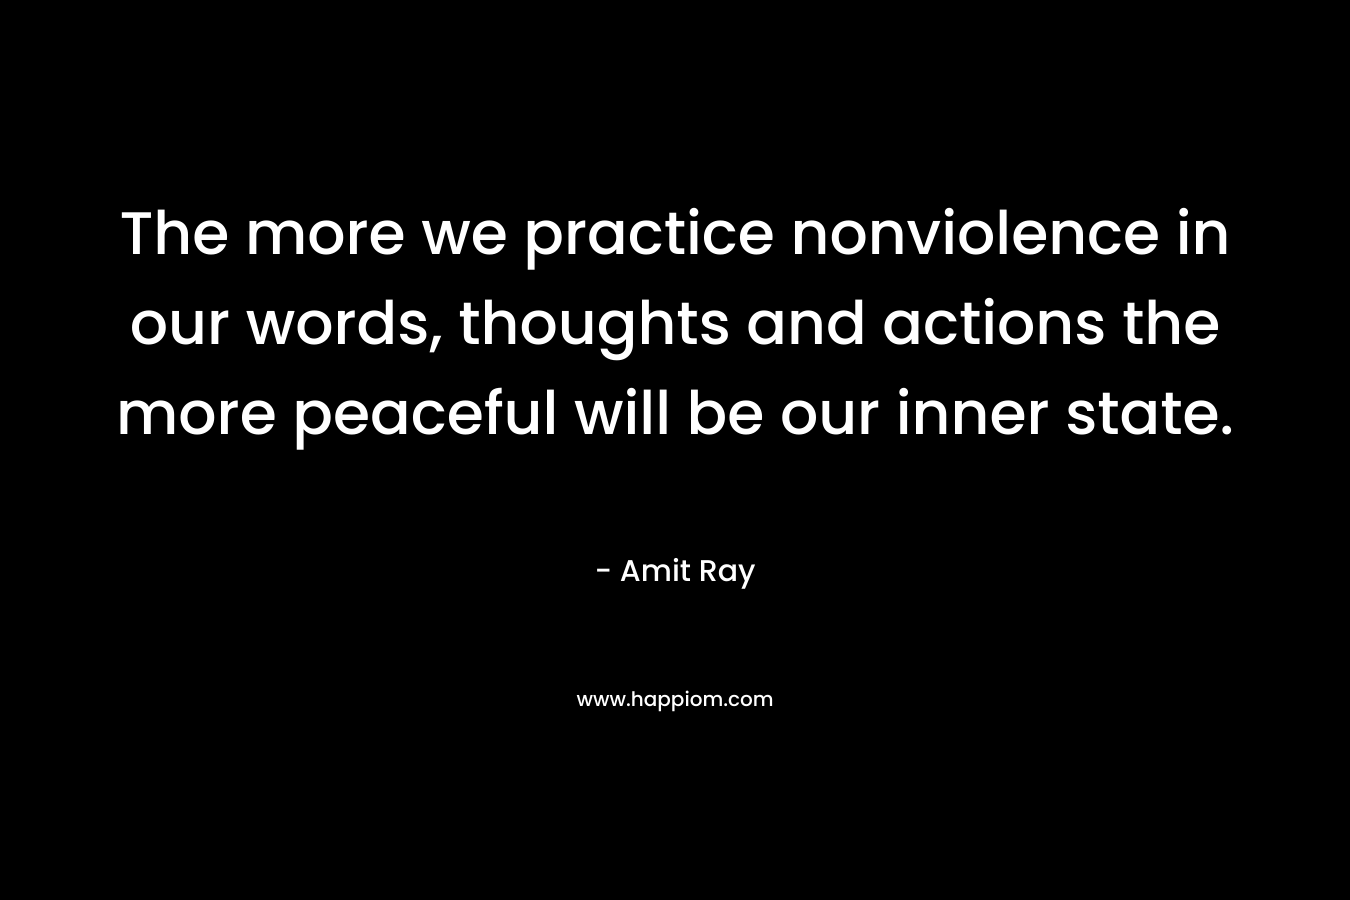 The more we practice nonviolence in our words, thoughts and actions the more peaceful will be our inner state.